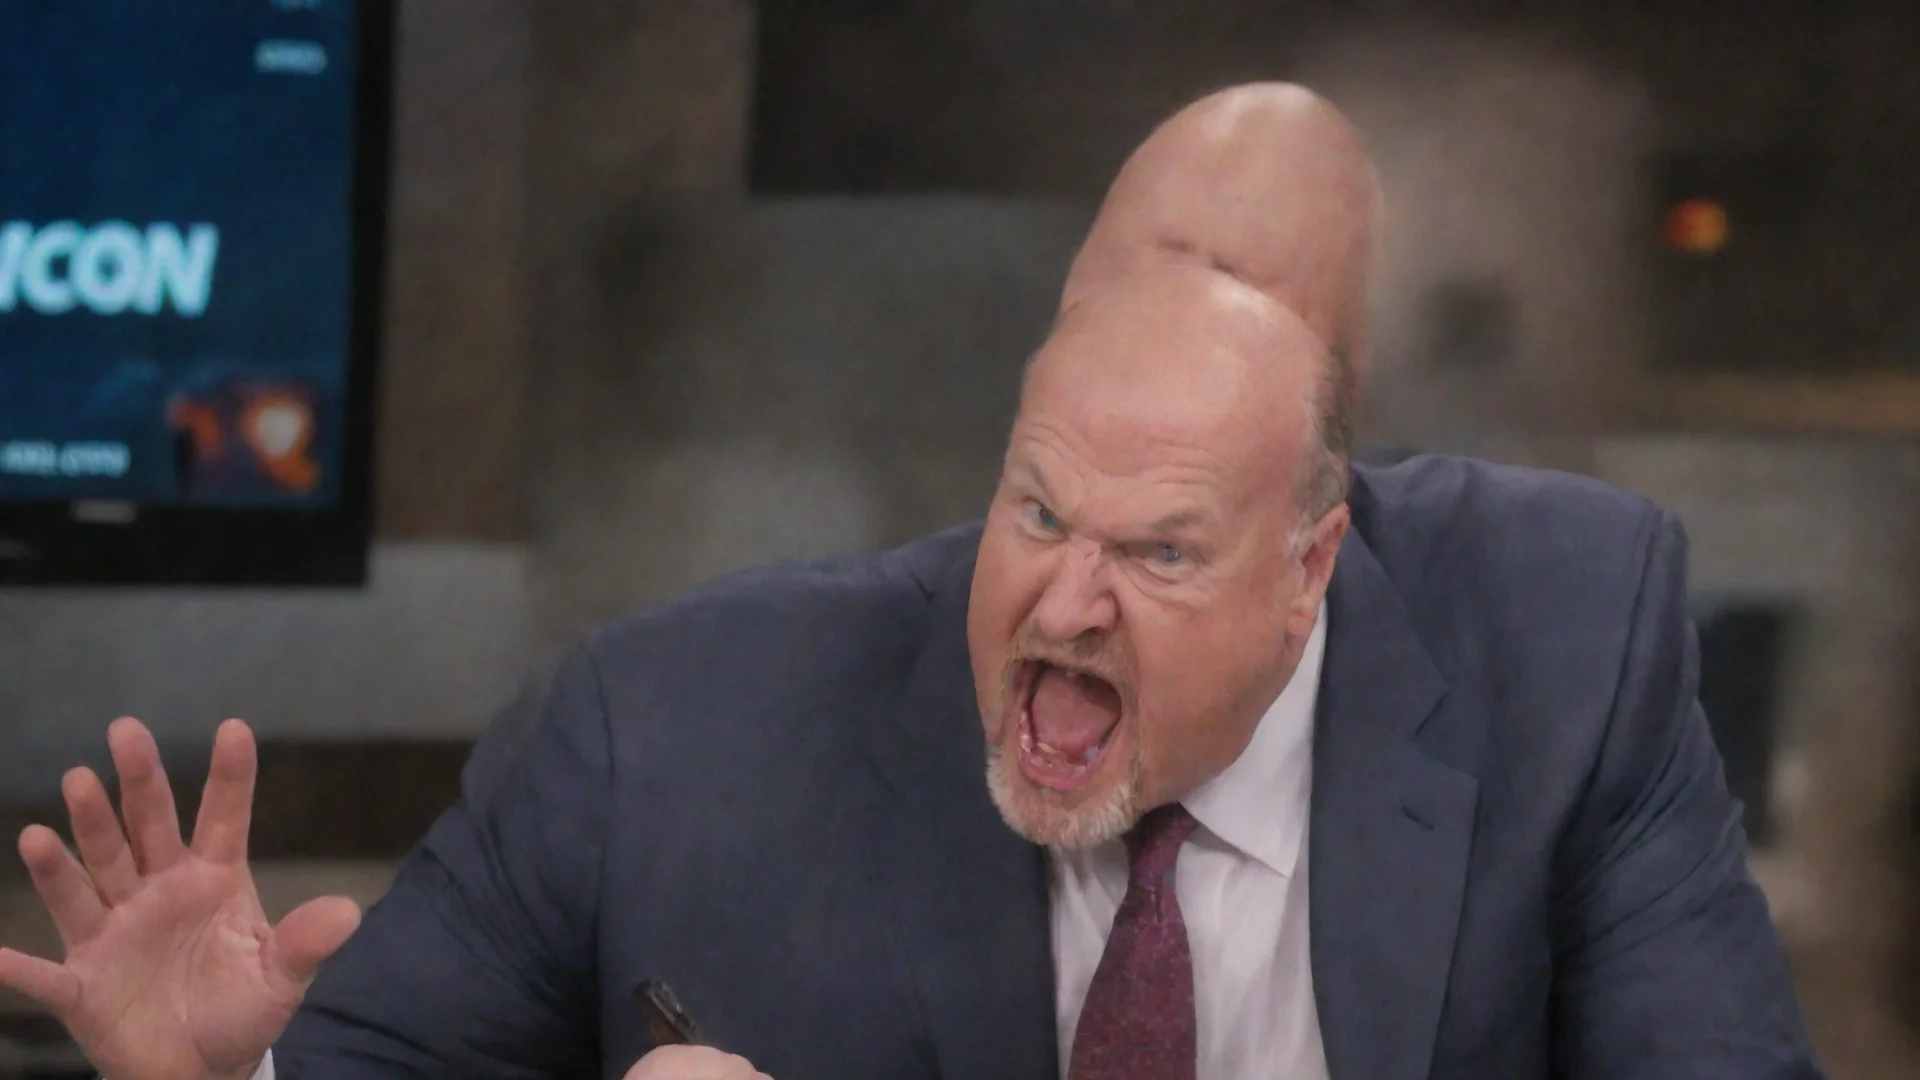 aiamazing jim cramer screaming at bitcoin awesome portrait 2 wide